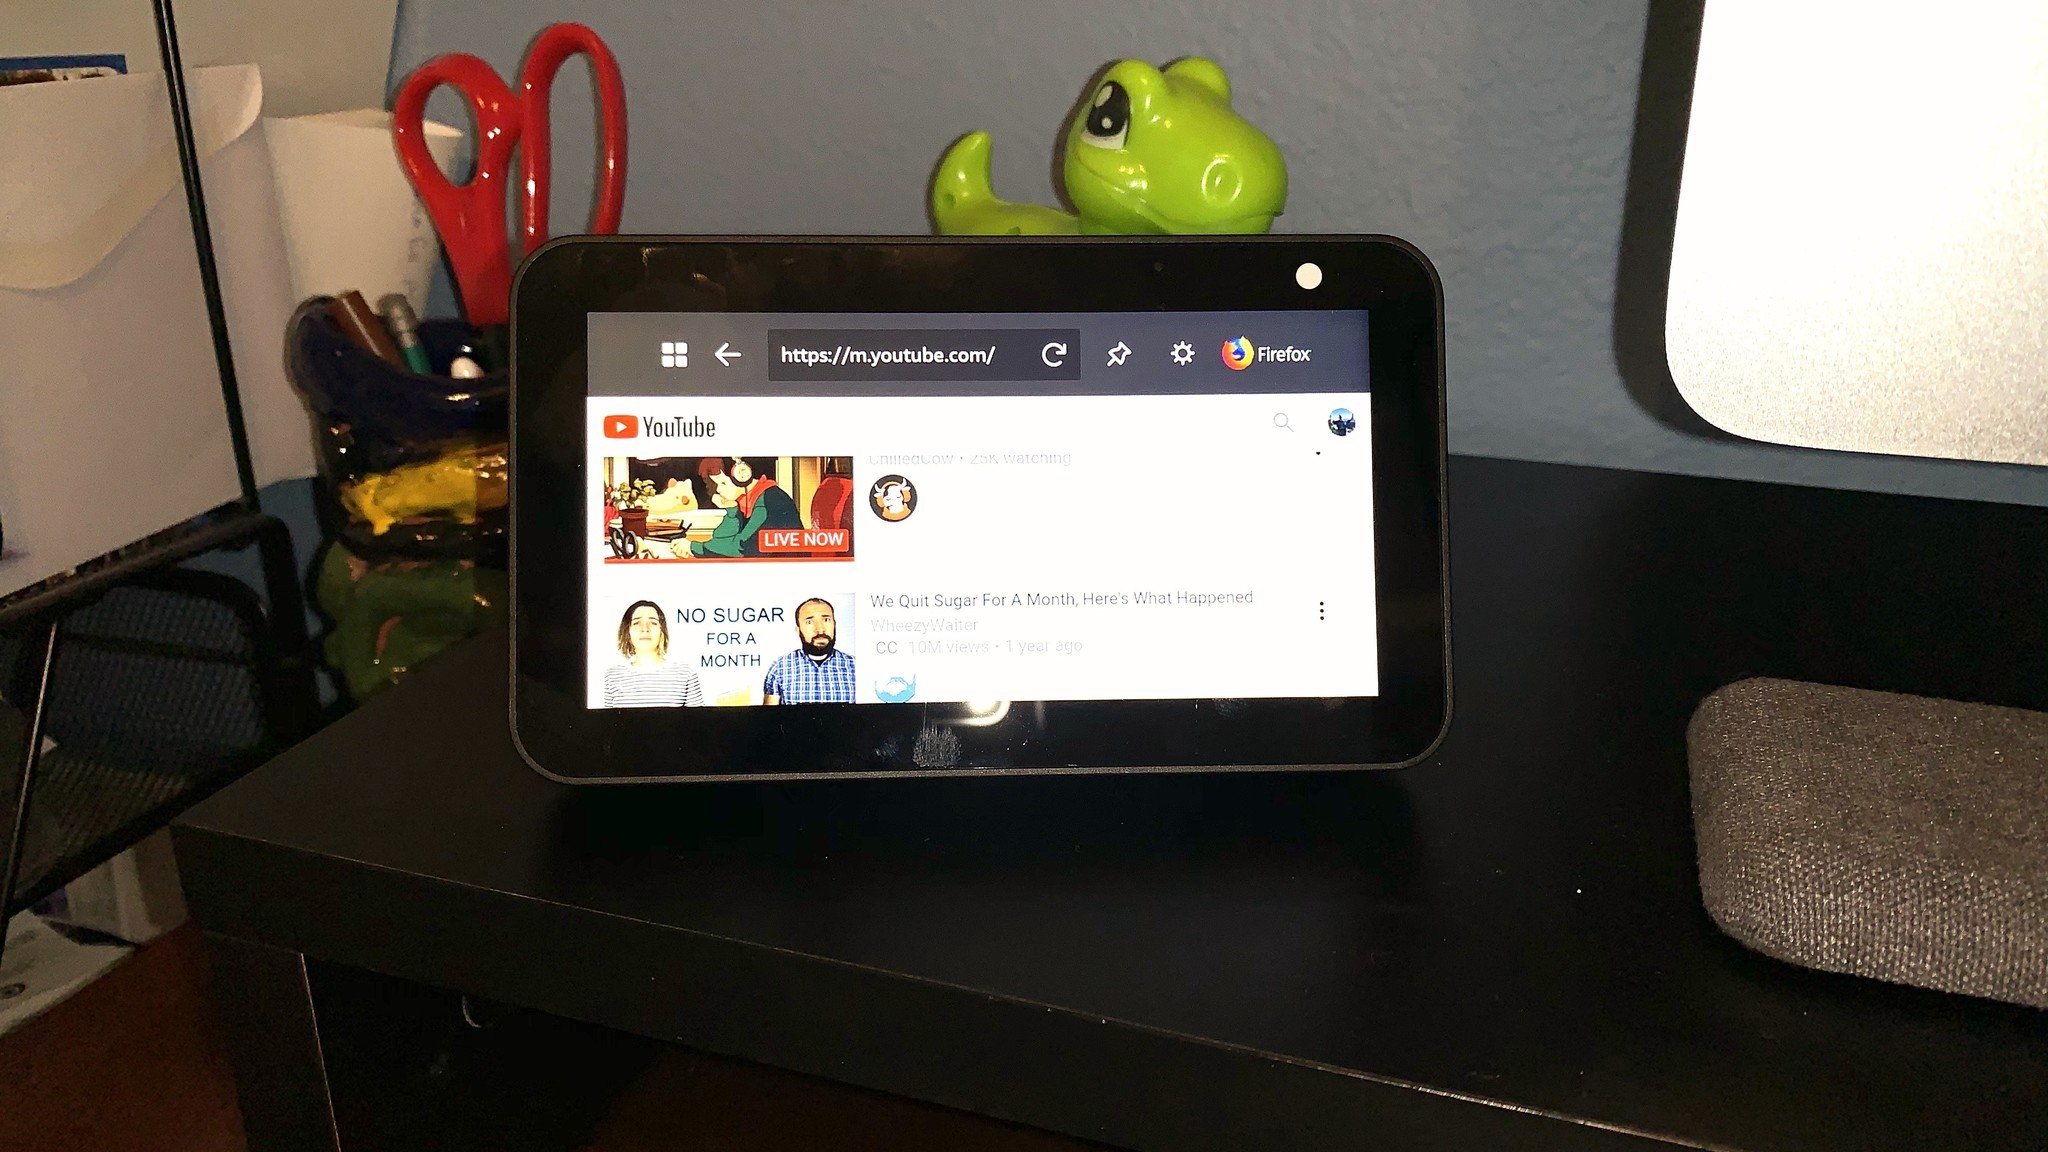 Can You Watch Netflix On Echo Show 5 How To Watch Live Youtube Streams On An Amazon Echo Show Android Central